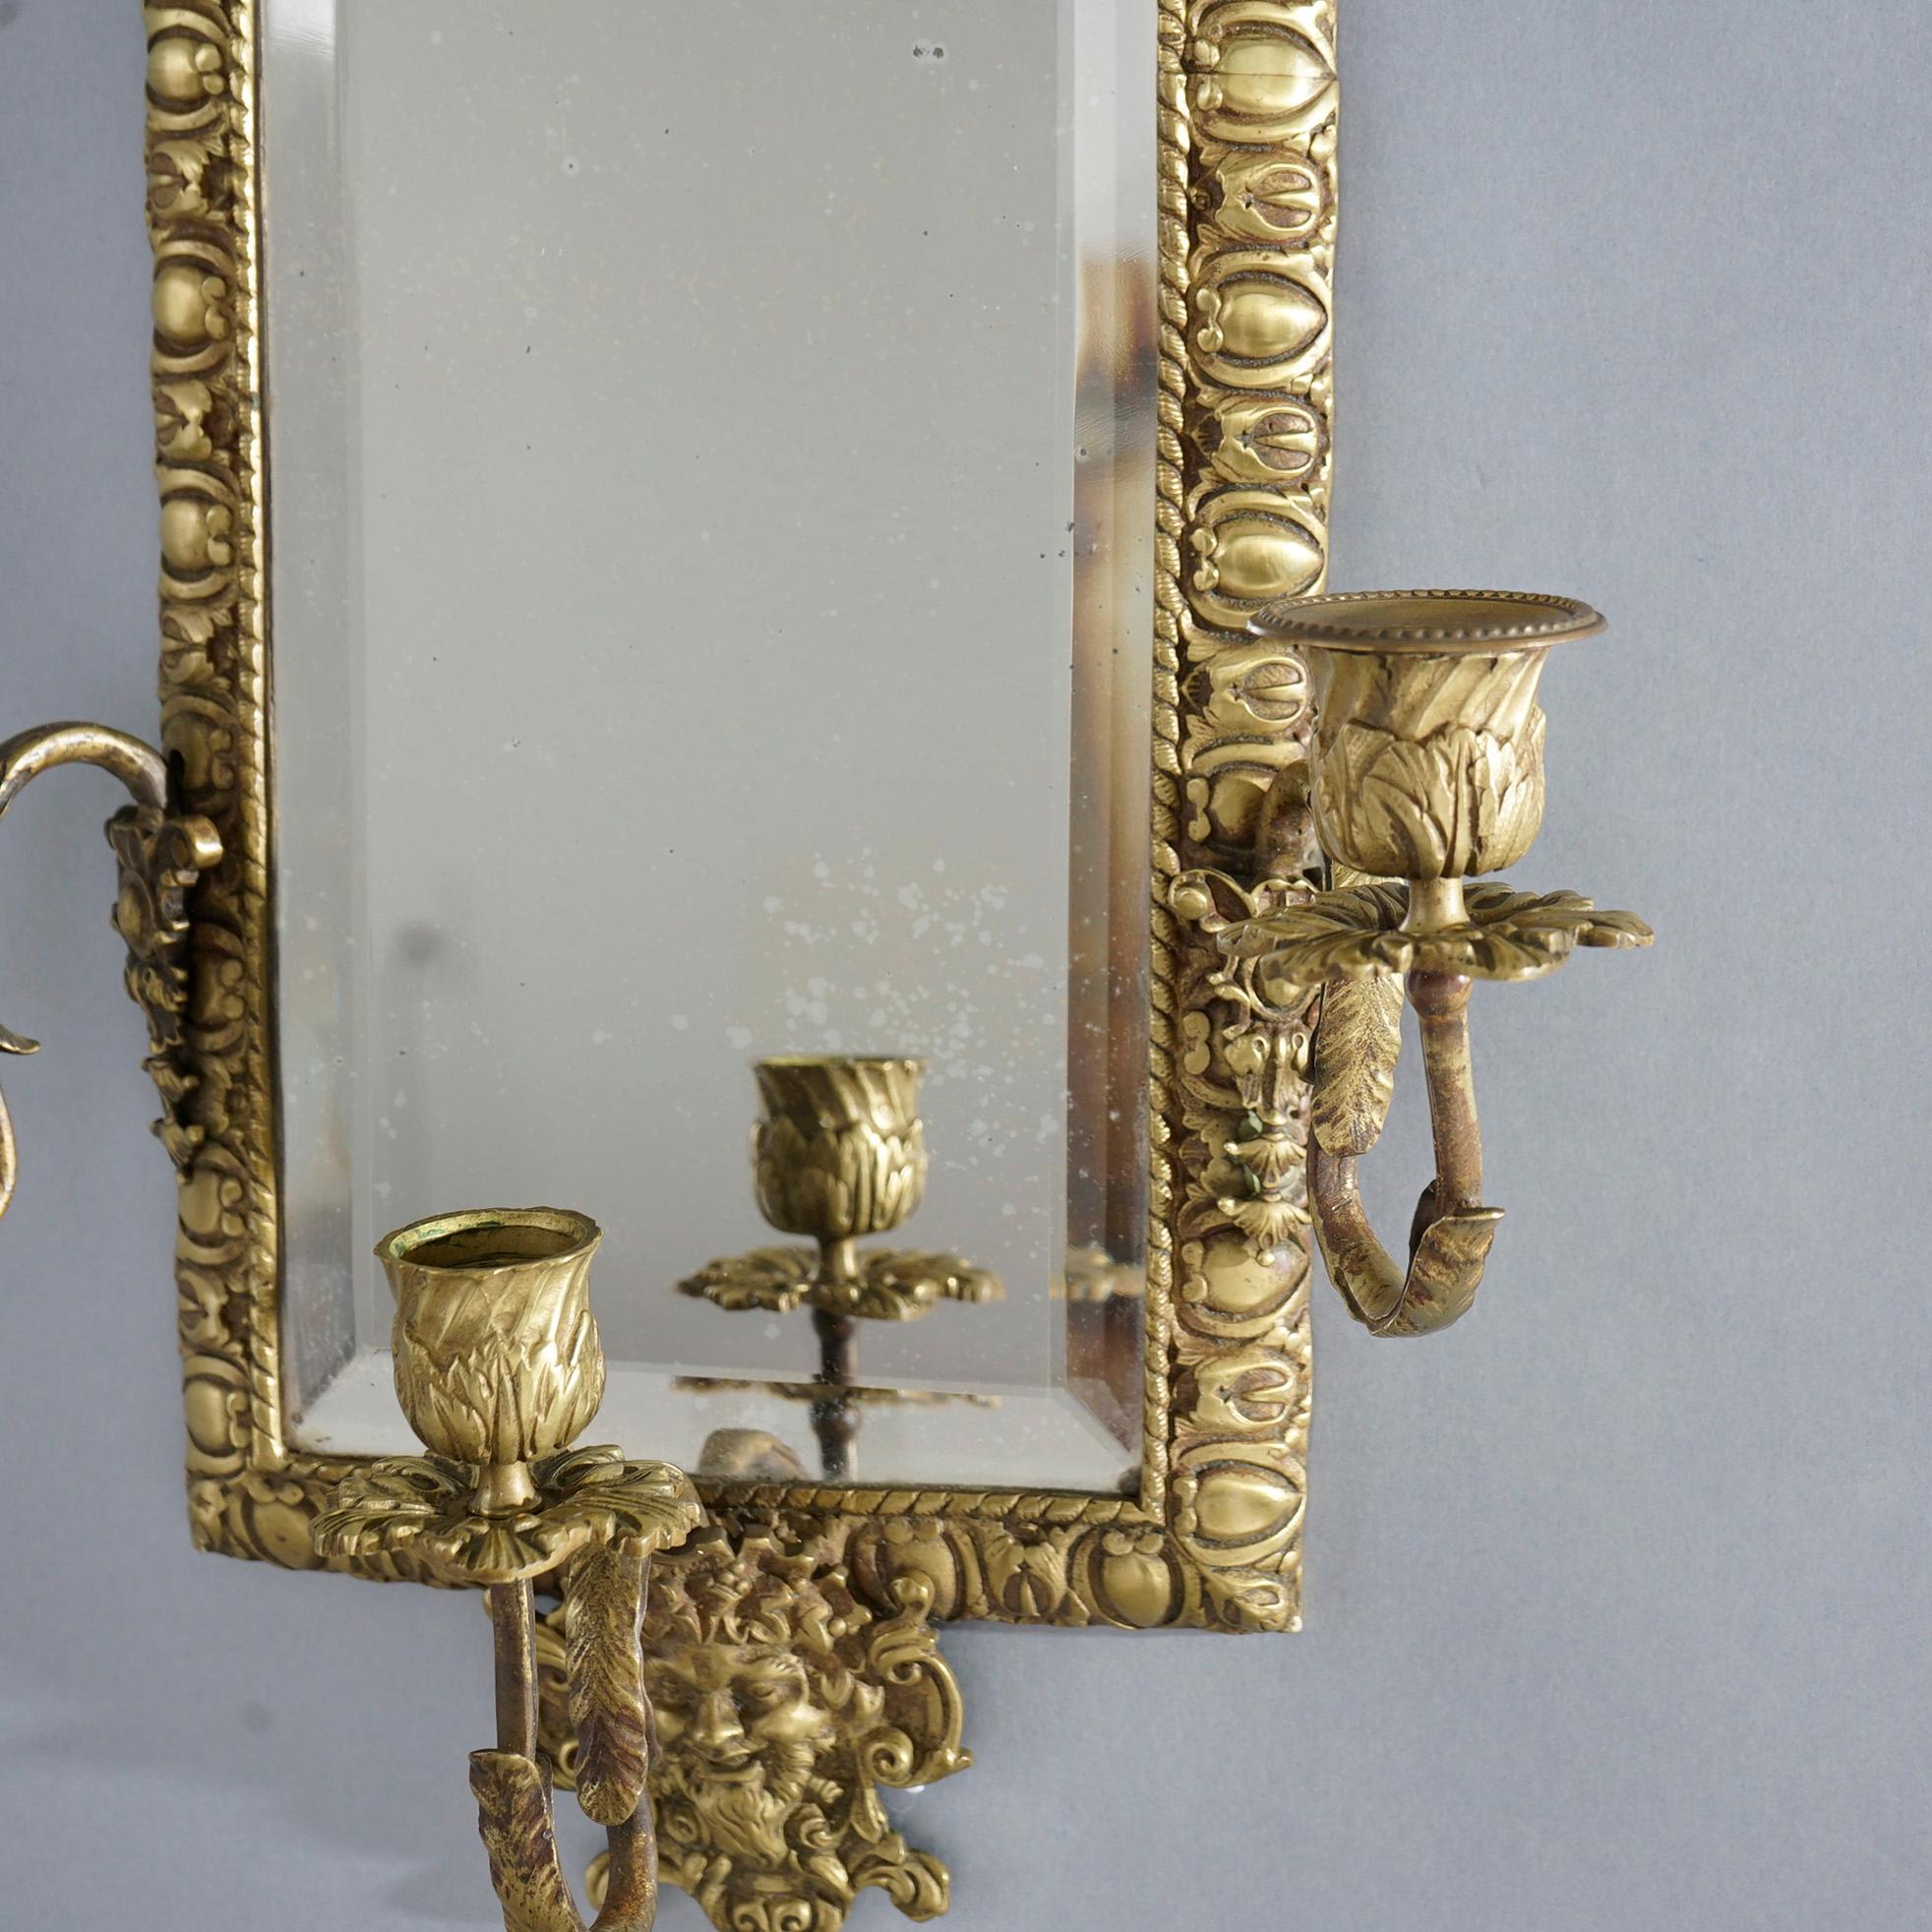 Pair Antique Victorian Mirrored Figural Gilt Metal Wall Sconces with Masks 19thC 2